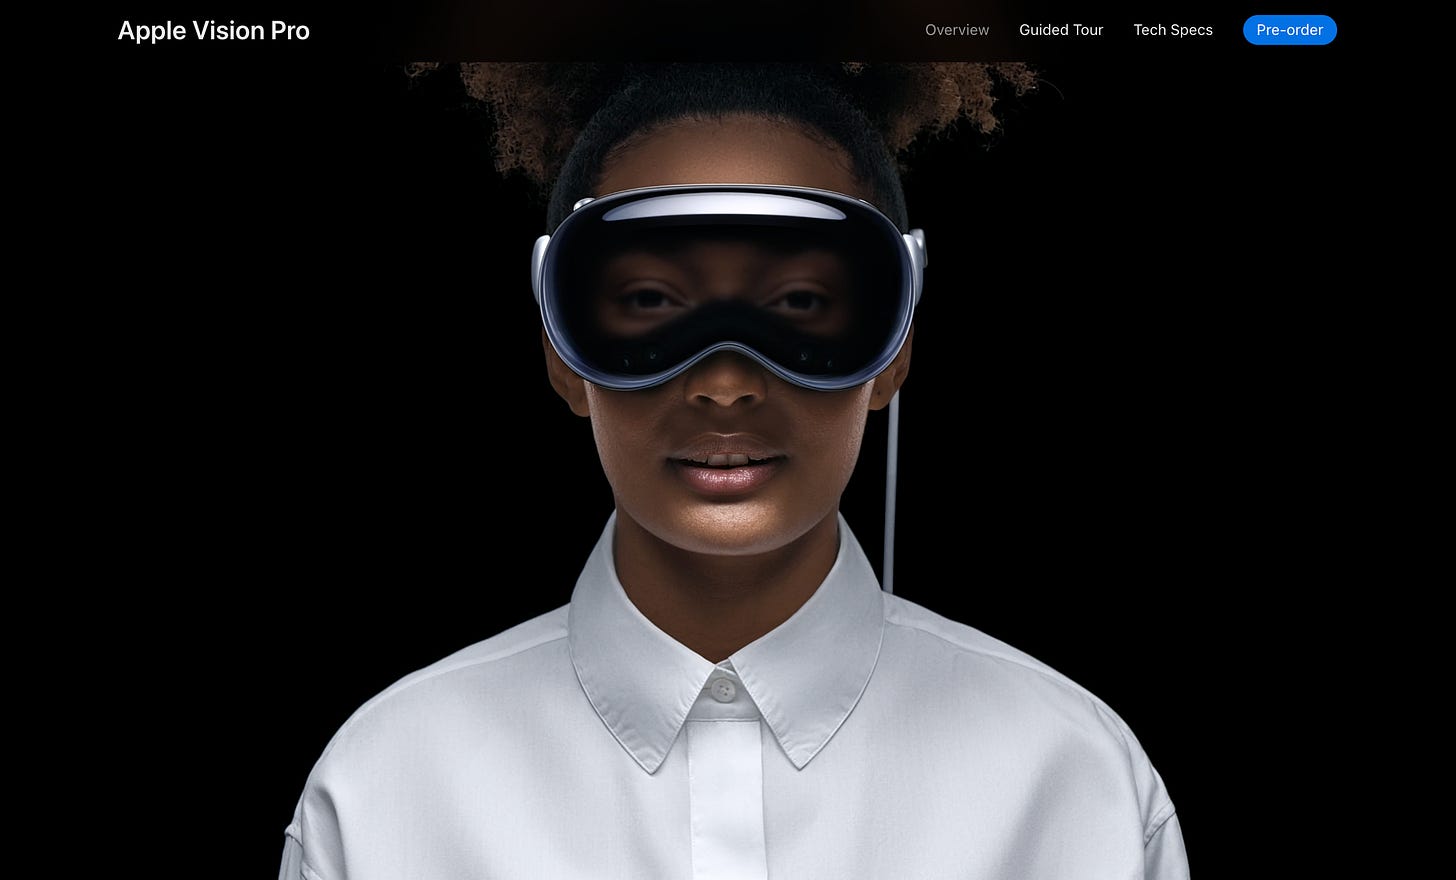 A Black woman wearing the new Apple Vision Pro. She's wearing a white shirt. Her eyes are projected on the ski goggle-like headset.